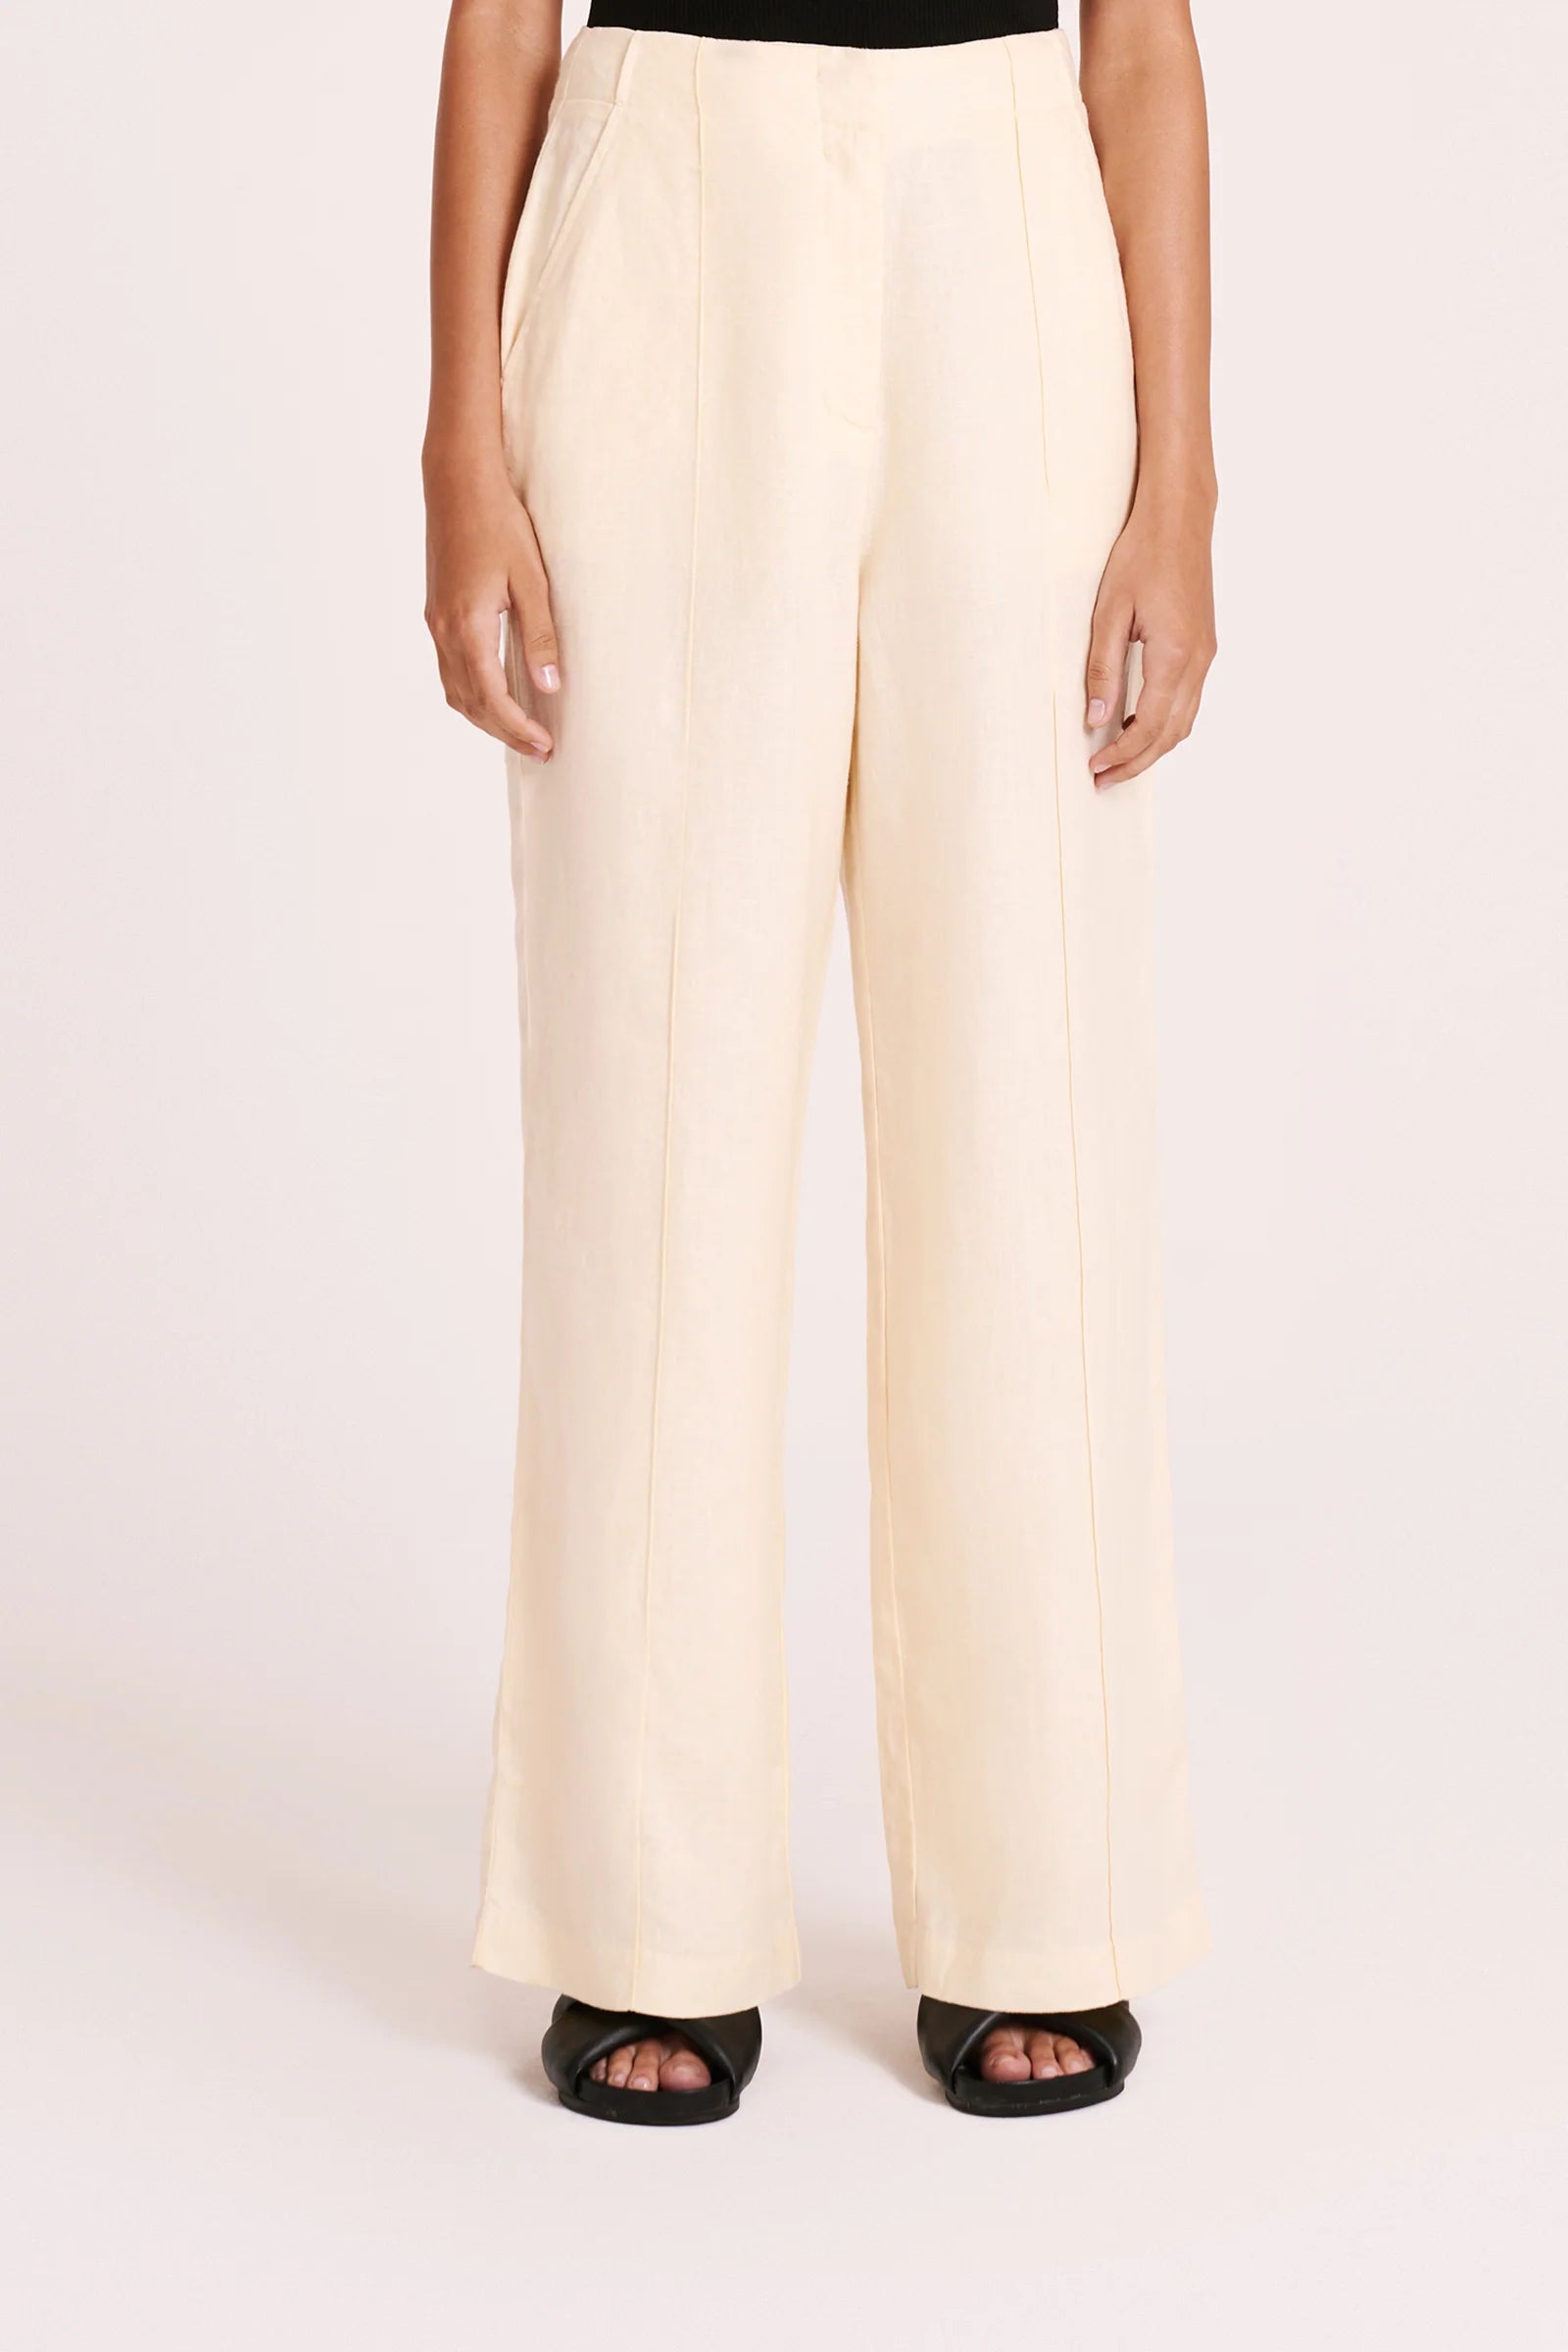 Nude Lucy Amani Tailored Linen Pant - Eggnog